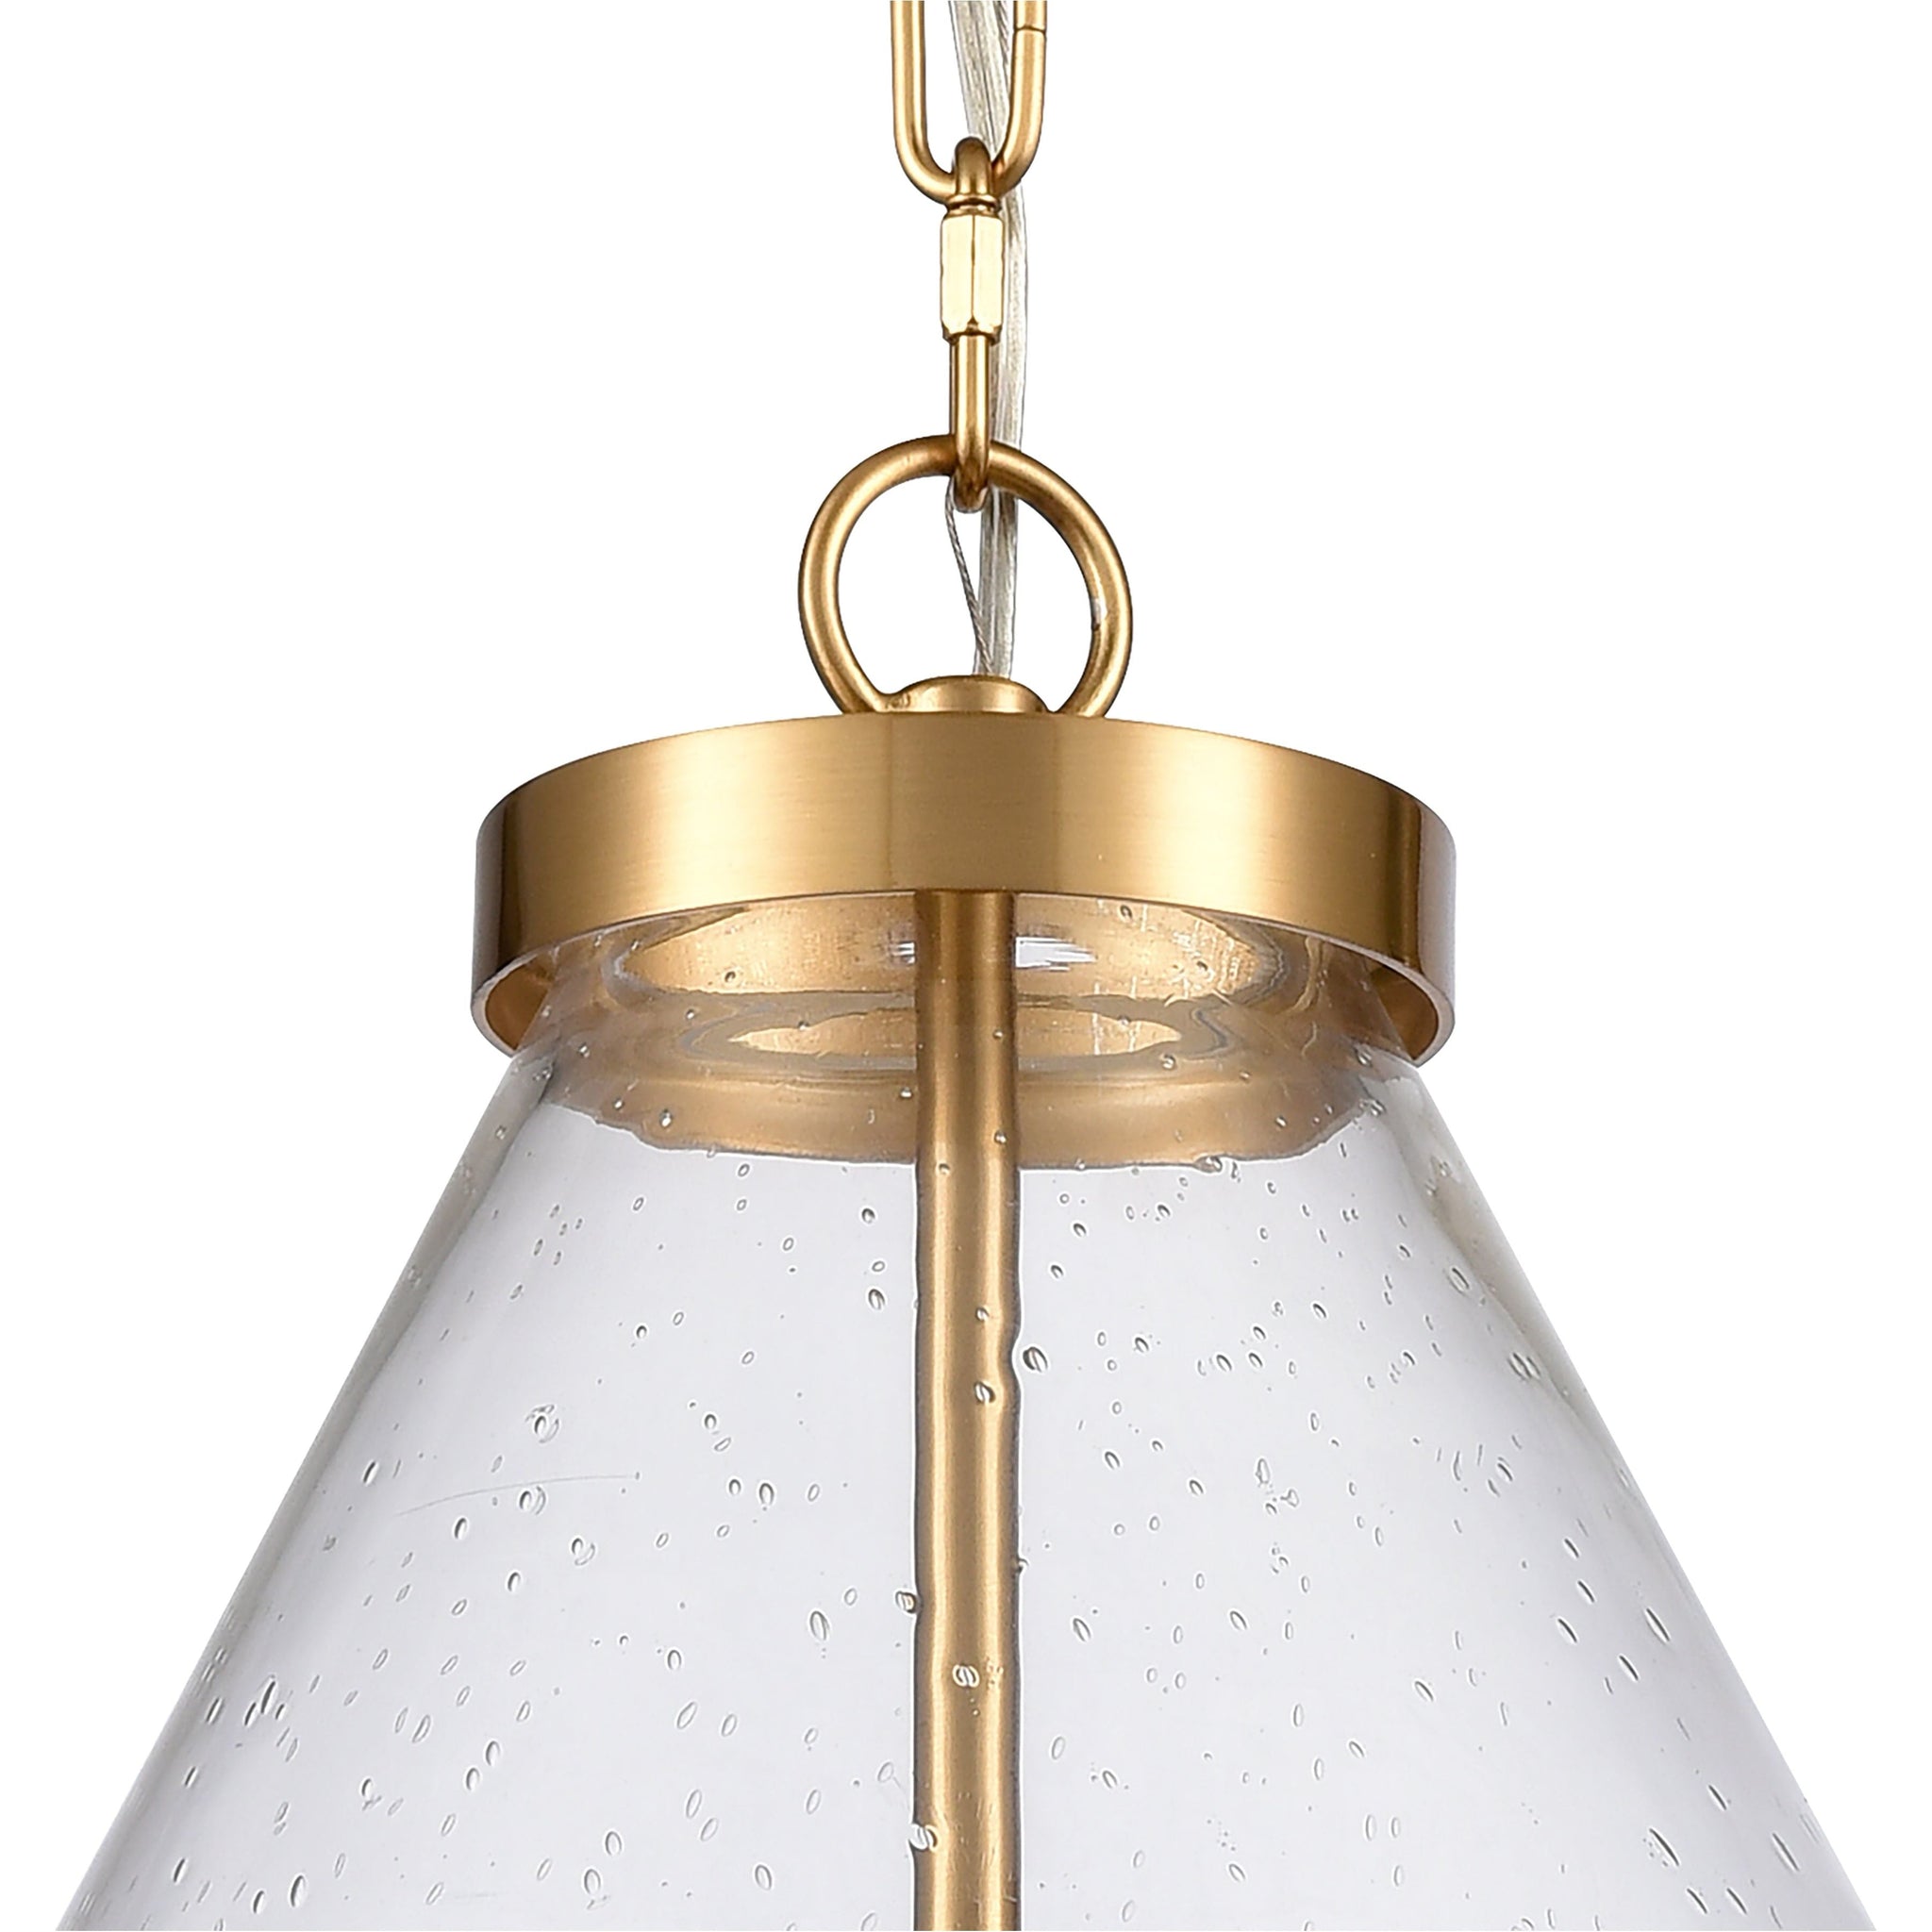 The Holding 17" Wide 4-Light Pendant